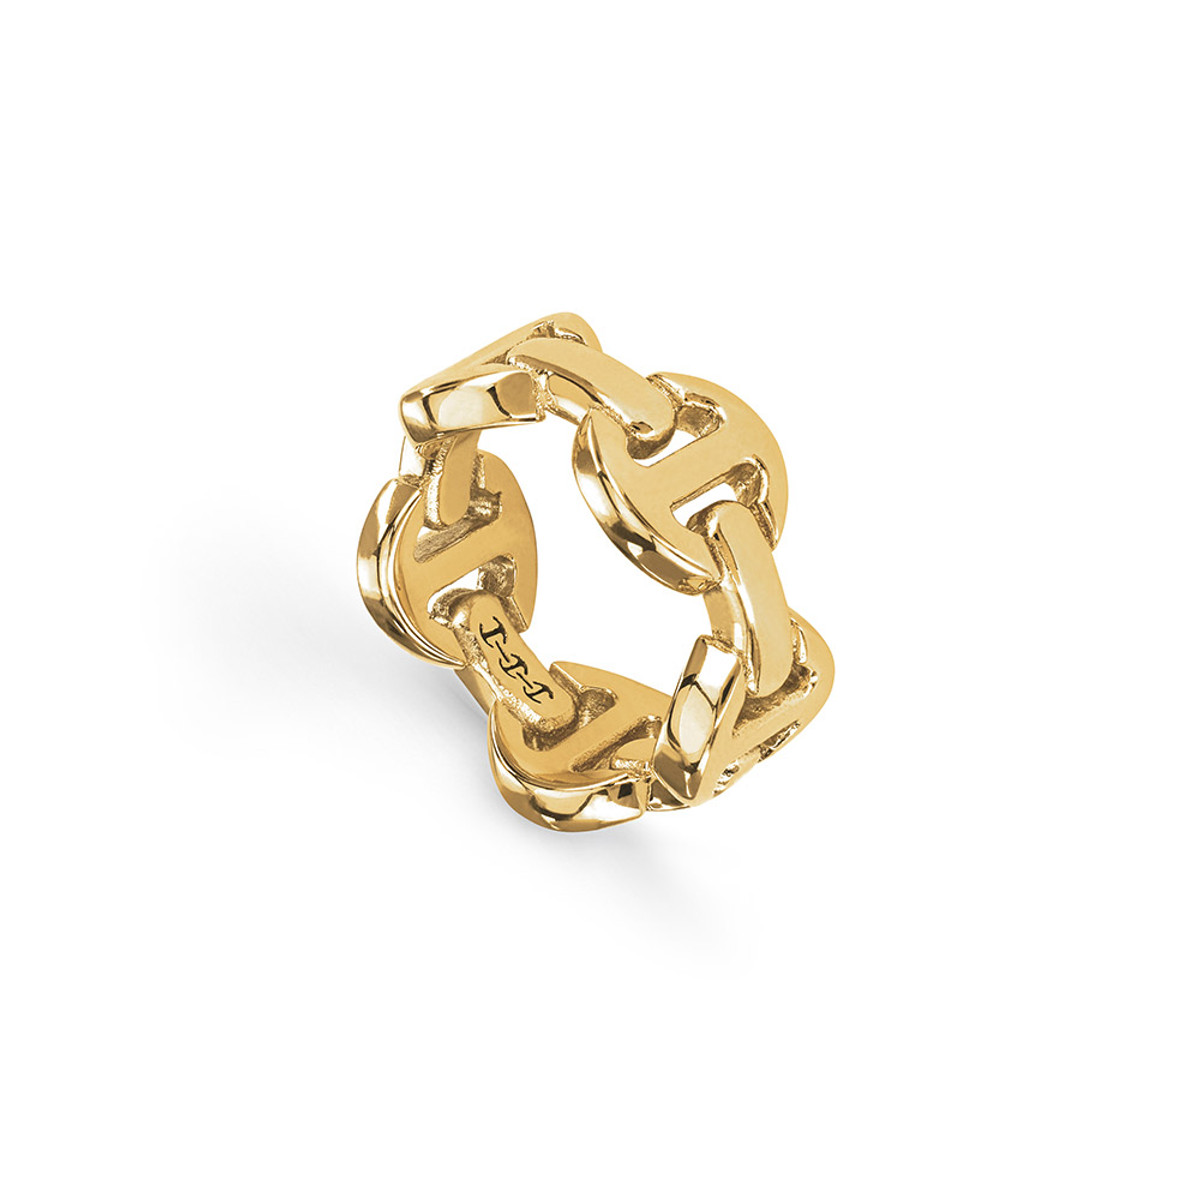 Hoorsenbuhs 18K Yellow Gold Heritage Dame Classic Tri-Link Ring-57485 Product Image